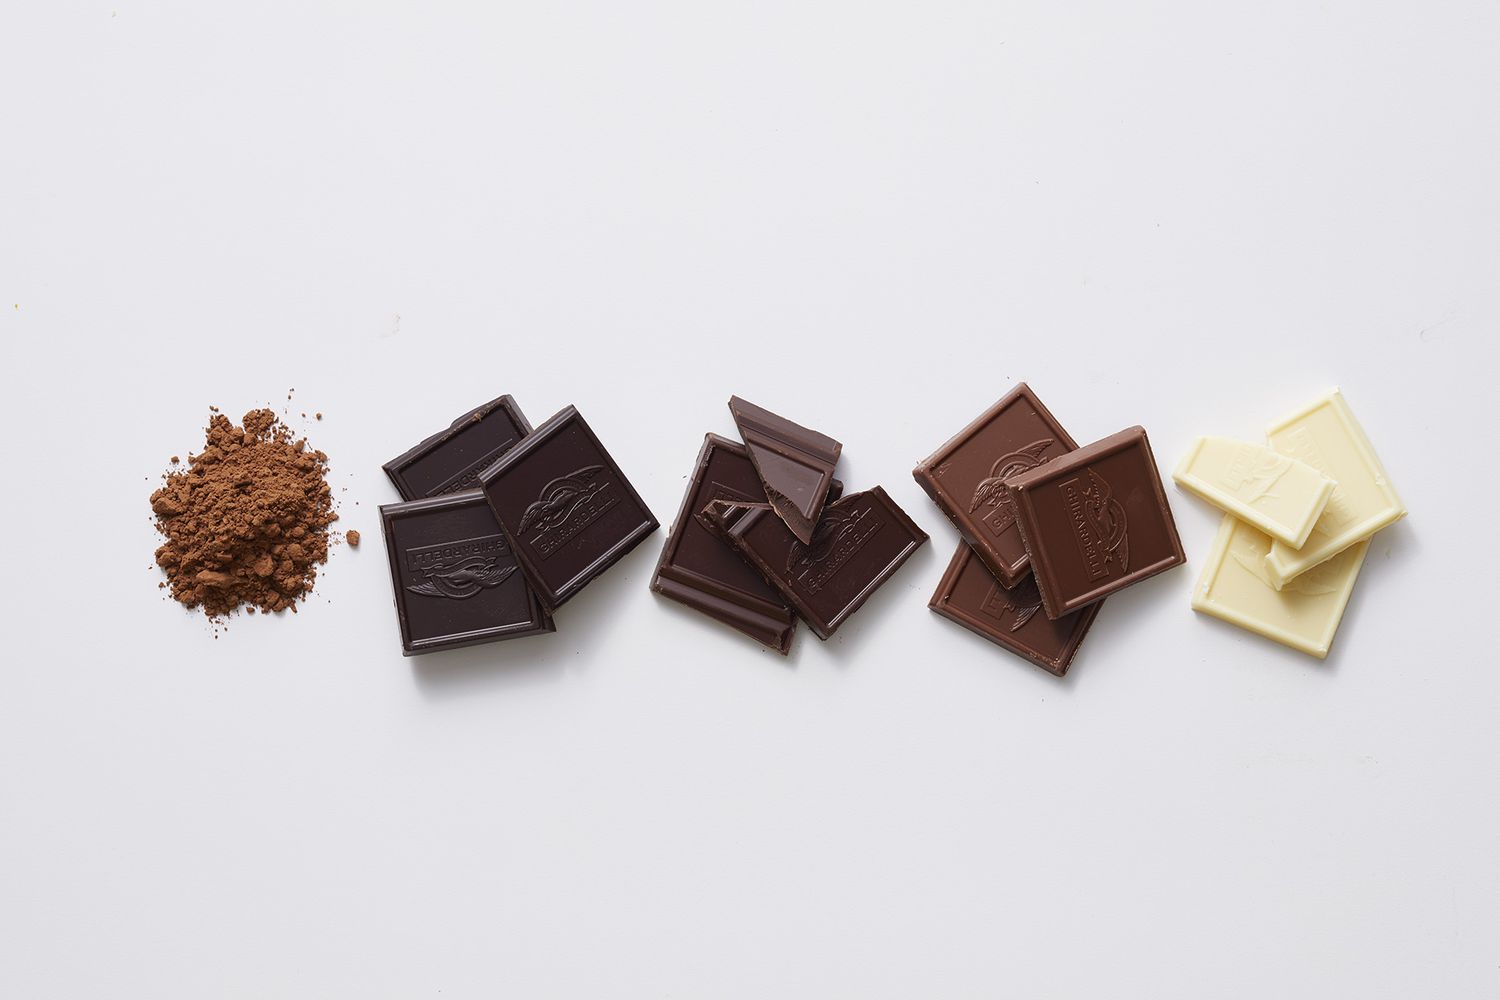 Row of different types of chocolate. From left to right: Cocoa powder, unsweetened chocolate, semisweet chocolate, milk chocolate, and white chocolate all on a plain white surface